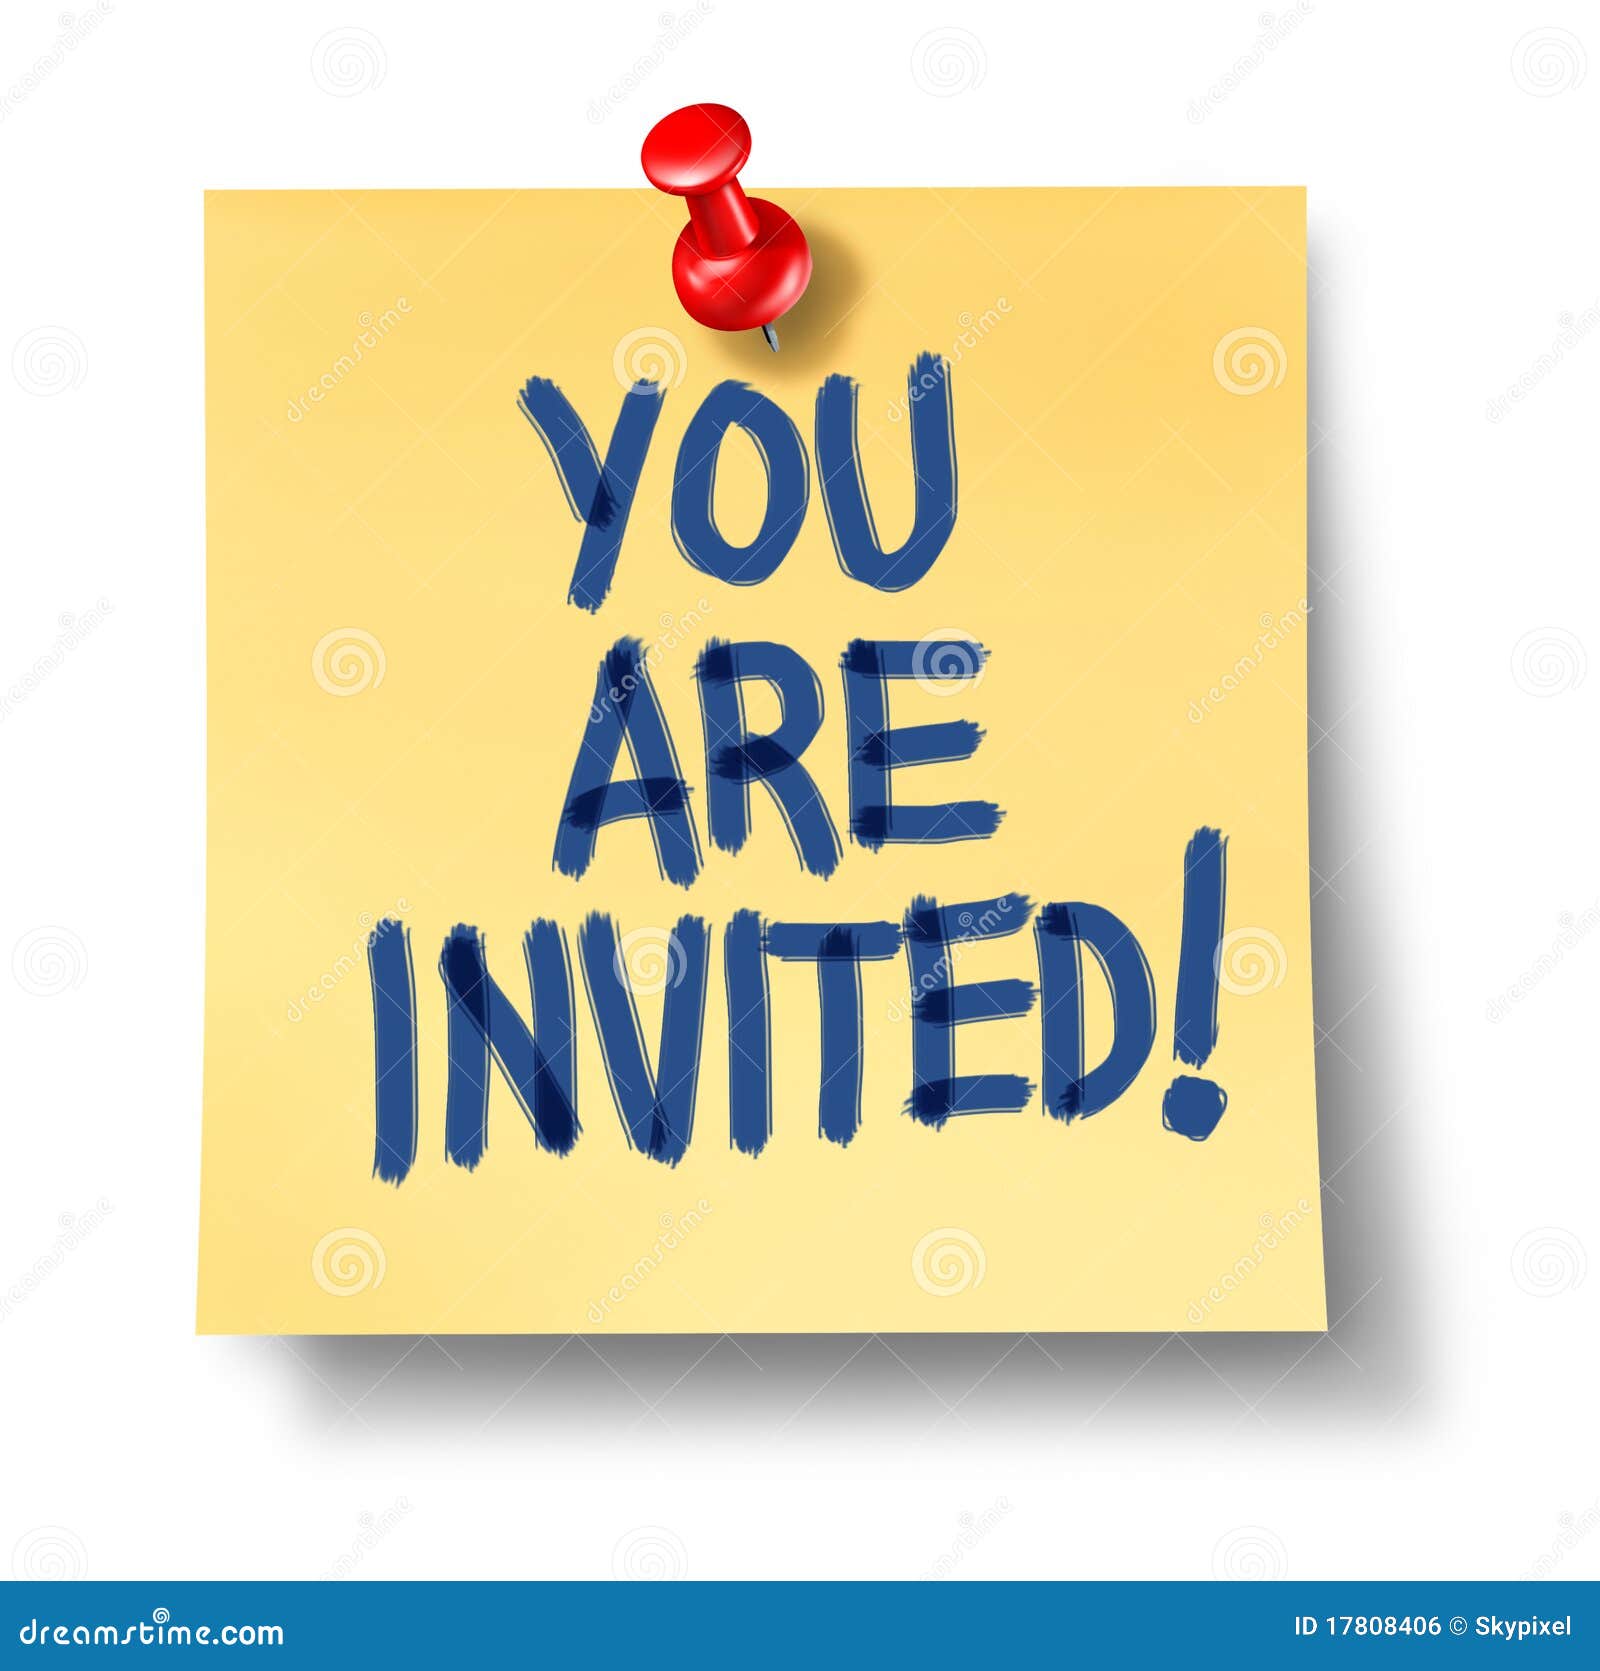 you are invited clipart - photo #1